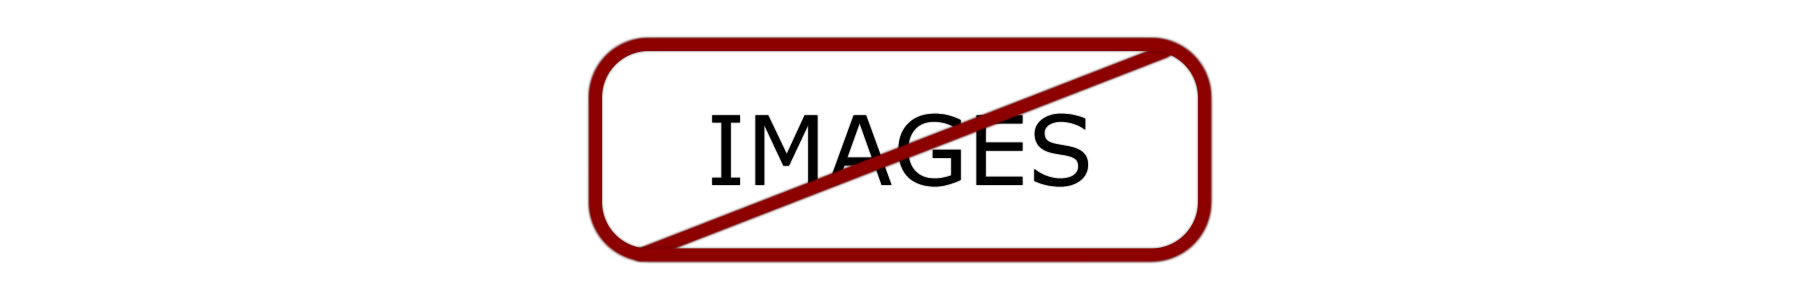 No Images within red rounded corner container with red slash running from corner to corner